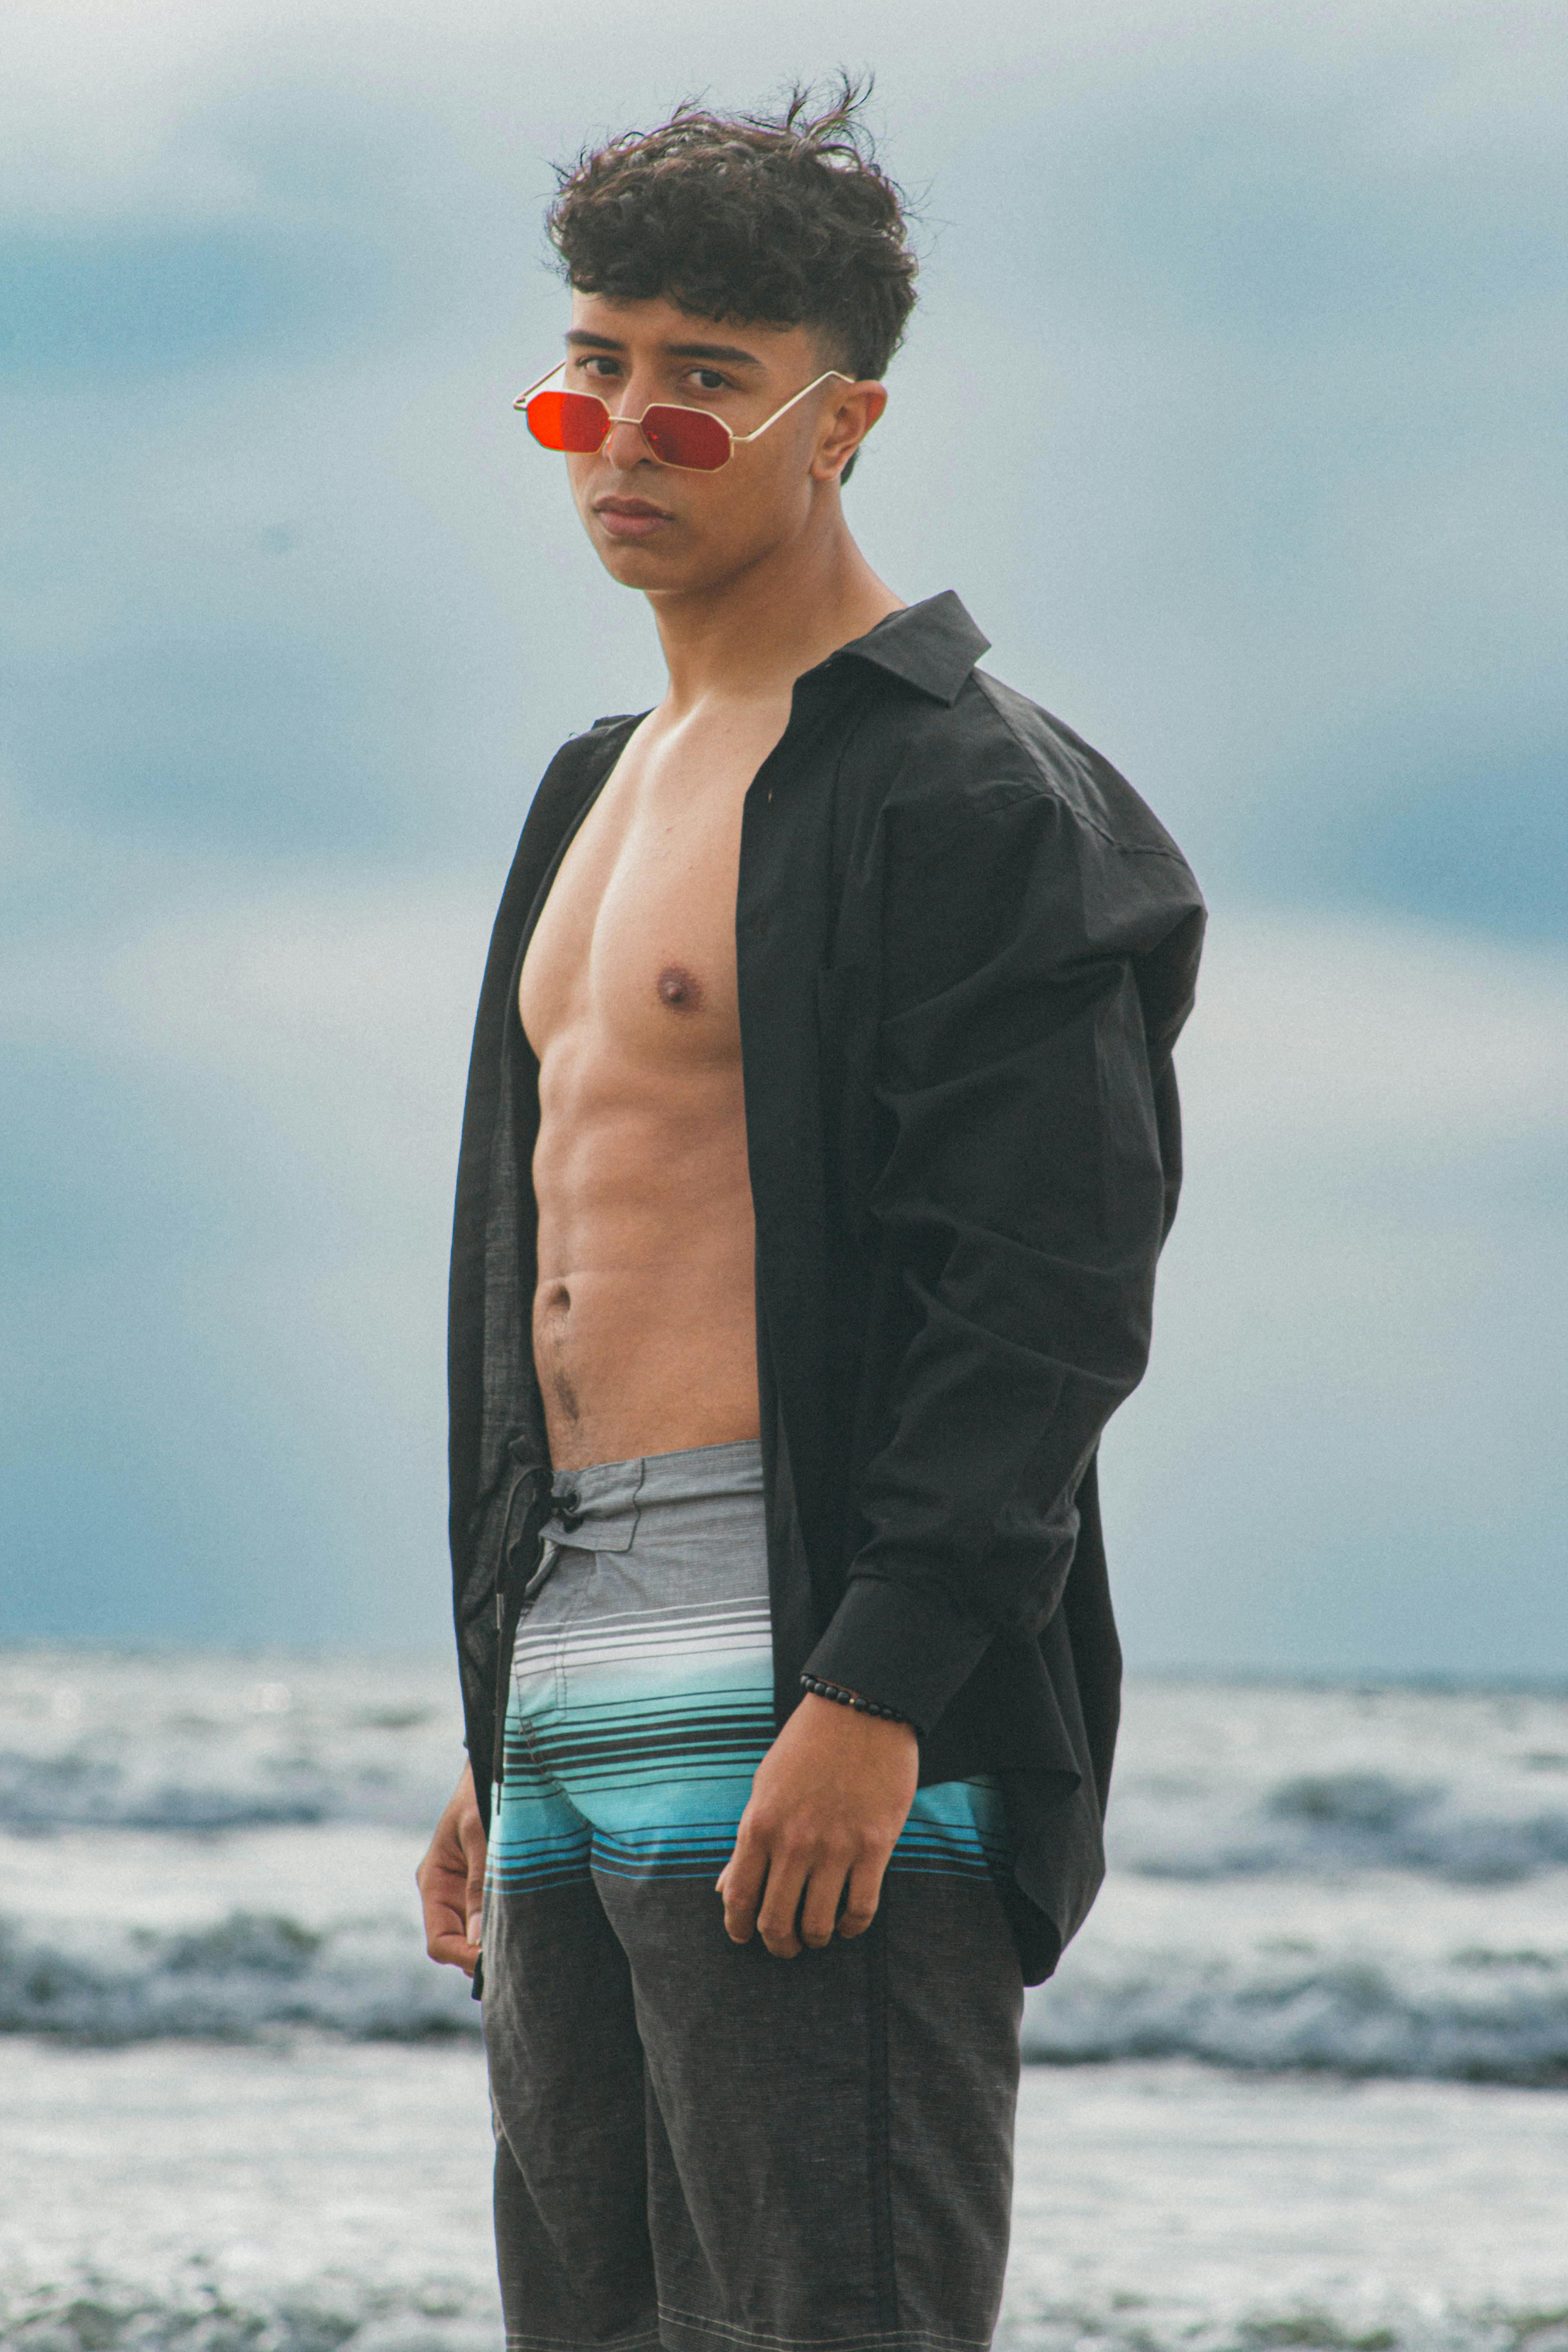 Free Photos - A Young Man Is Wearing Sunglasses And A Patterned Shirt,  Striking A Pose Near The Beach. He Has Flowing Hair And Appears To Be  Enjoying His Time Outdoors In